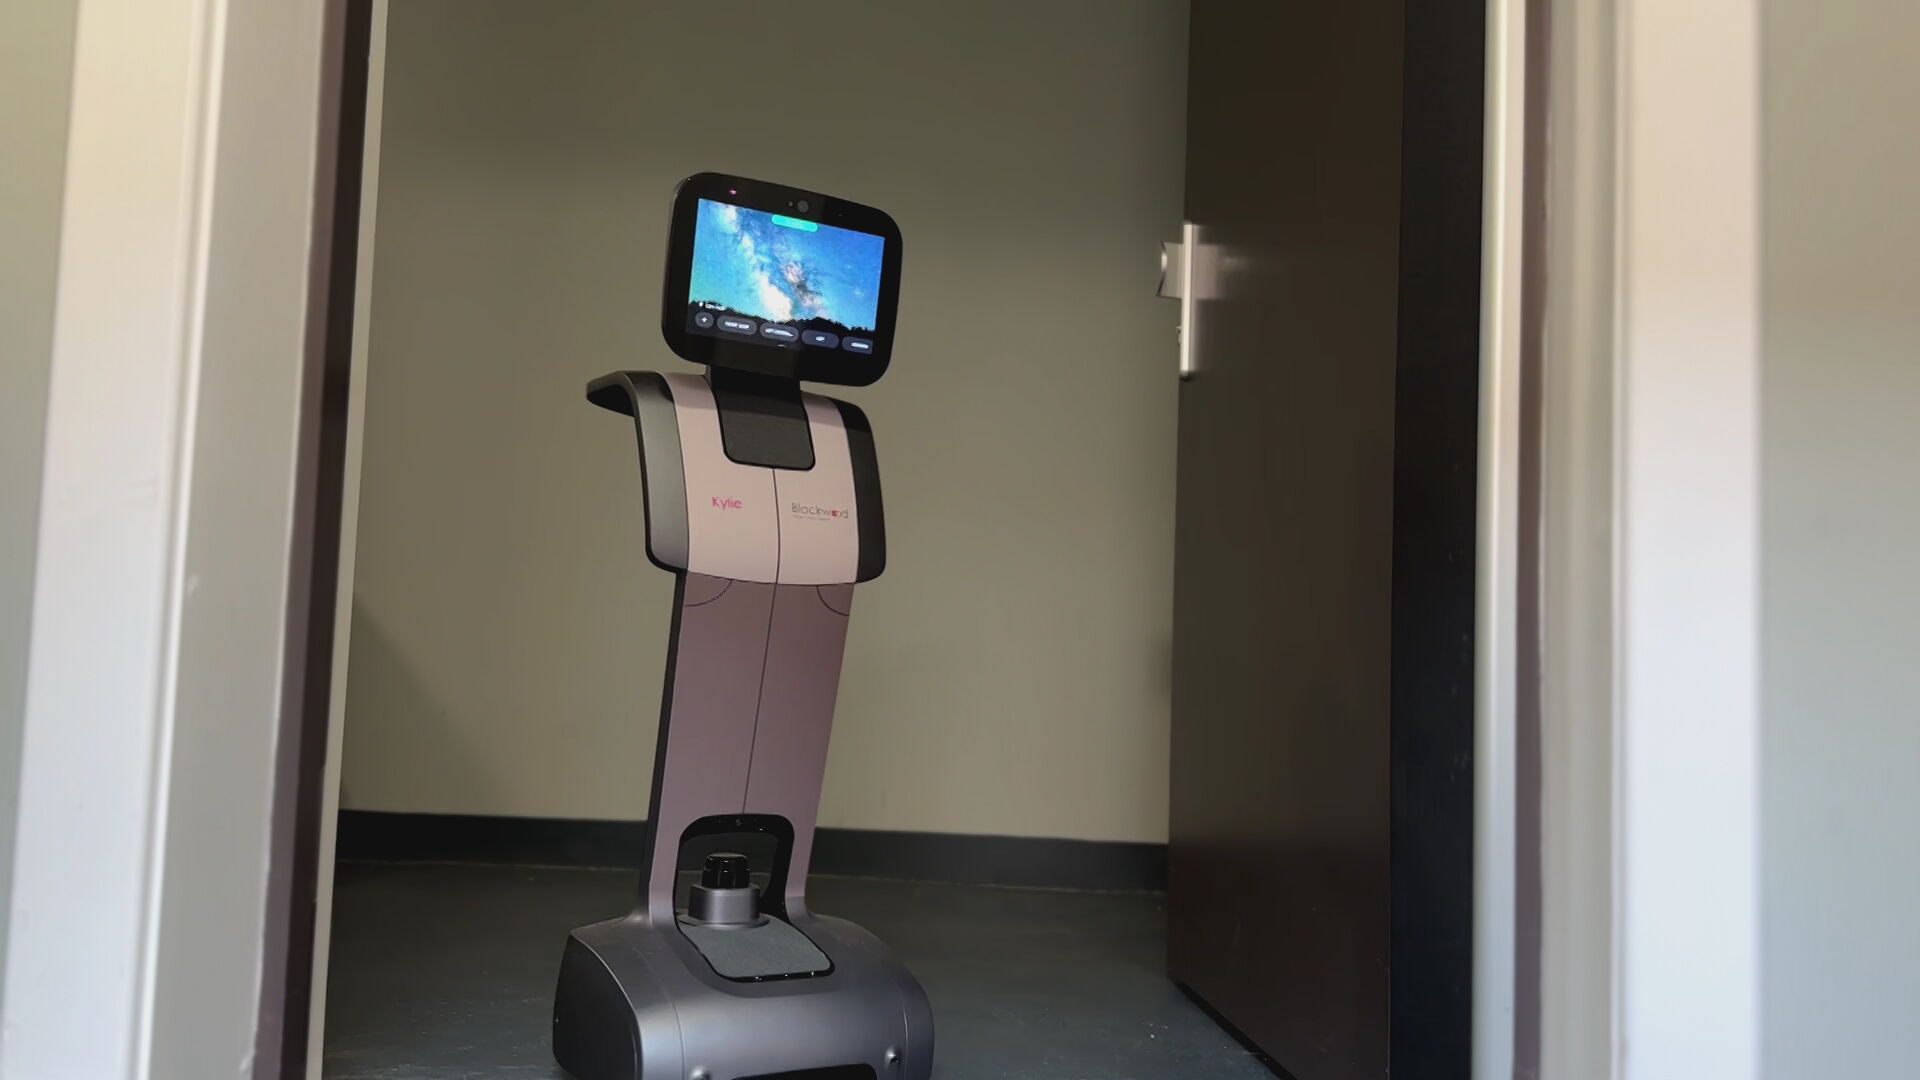 Some robots have been designed to help ease pressure on frontline healthcare staff and address cognitive decline in patients